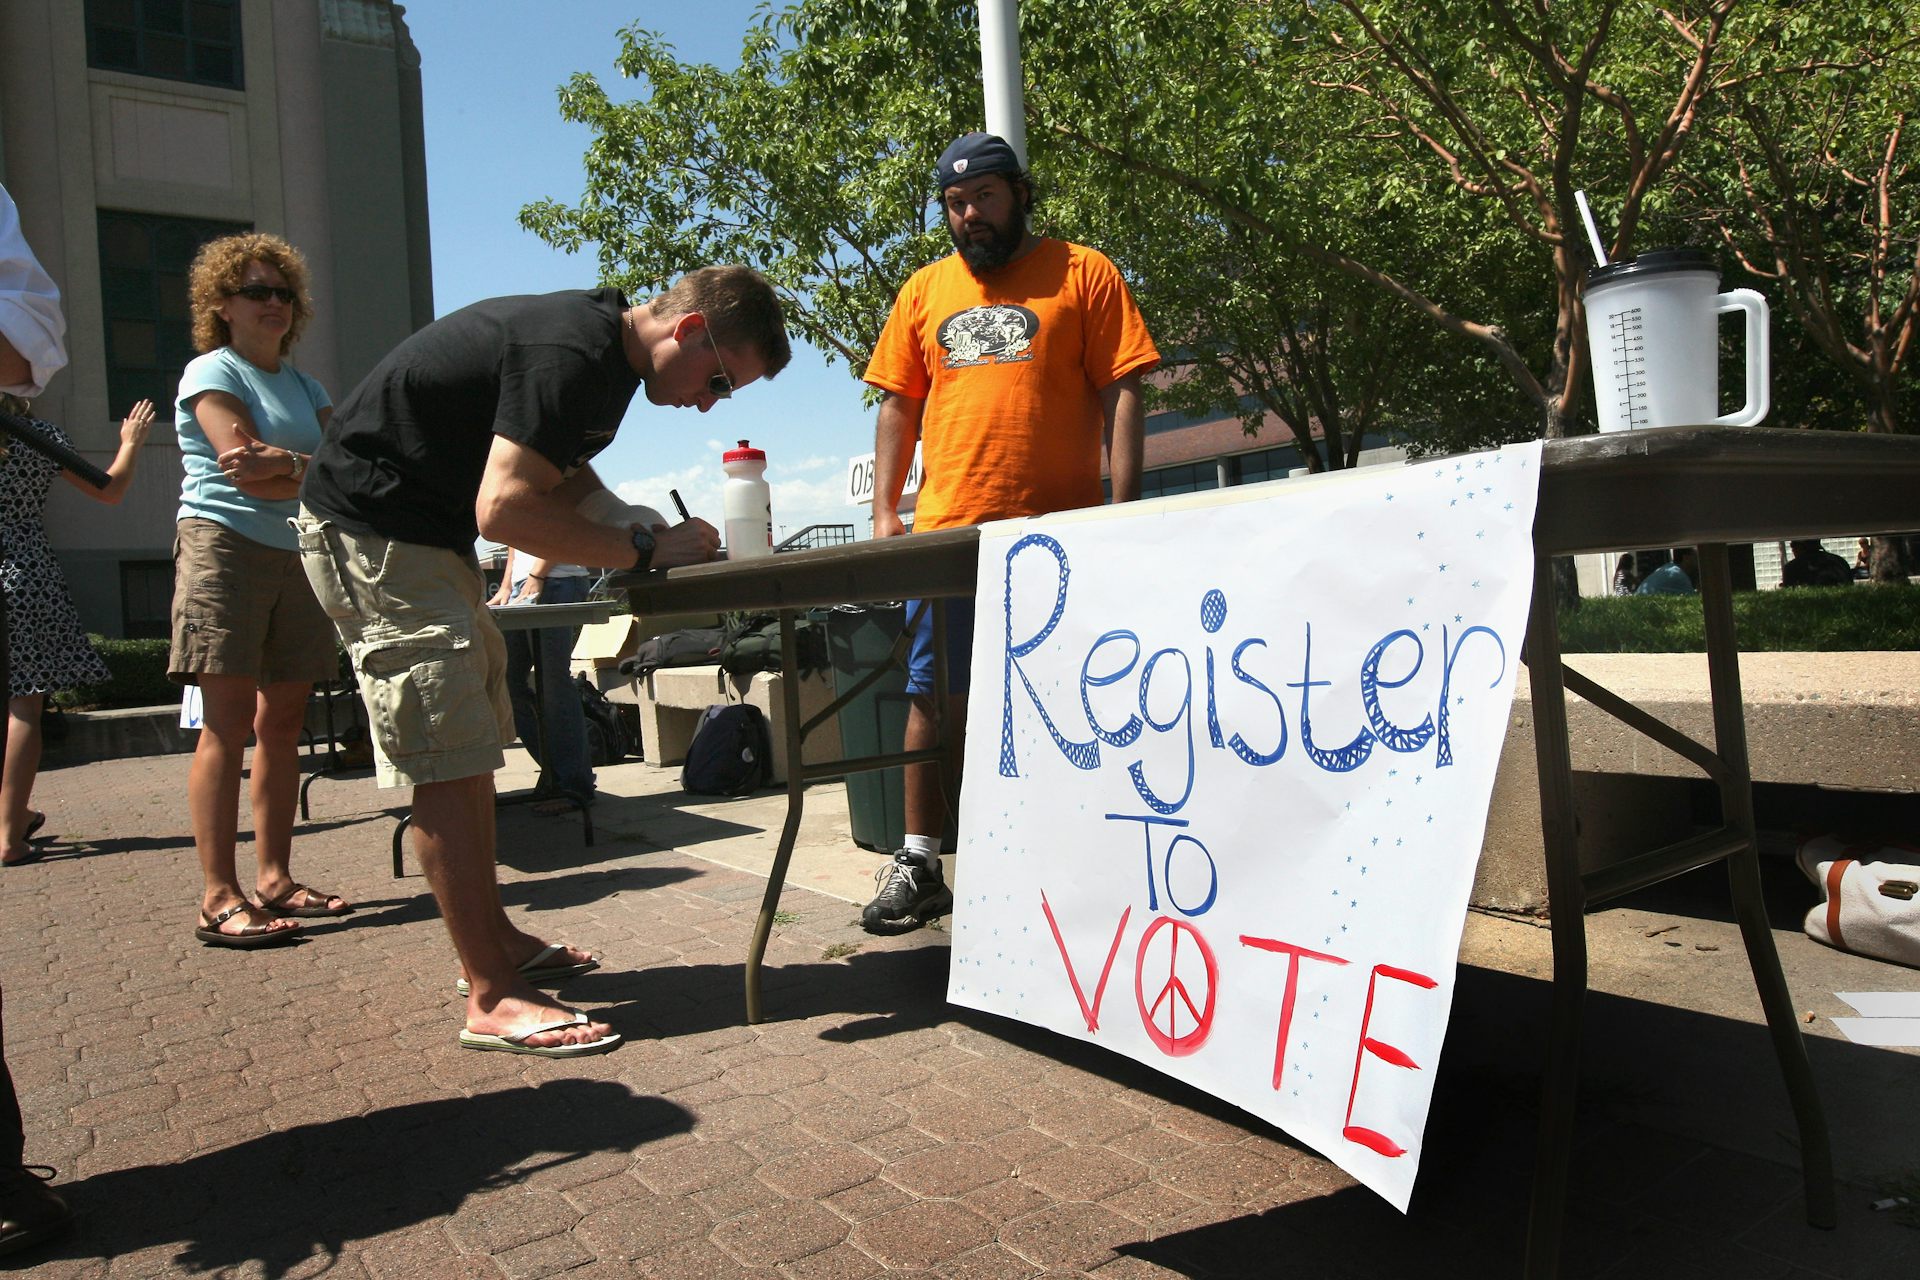 A man in an orange shirt stands next to a table outdoors with a sign that says 'register to vote' while another man leans over the table, filing out paperwork.